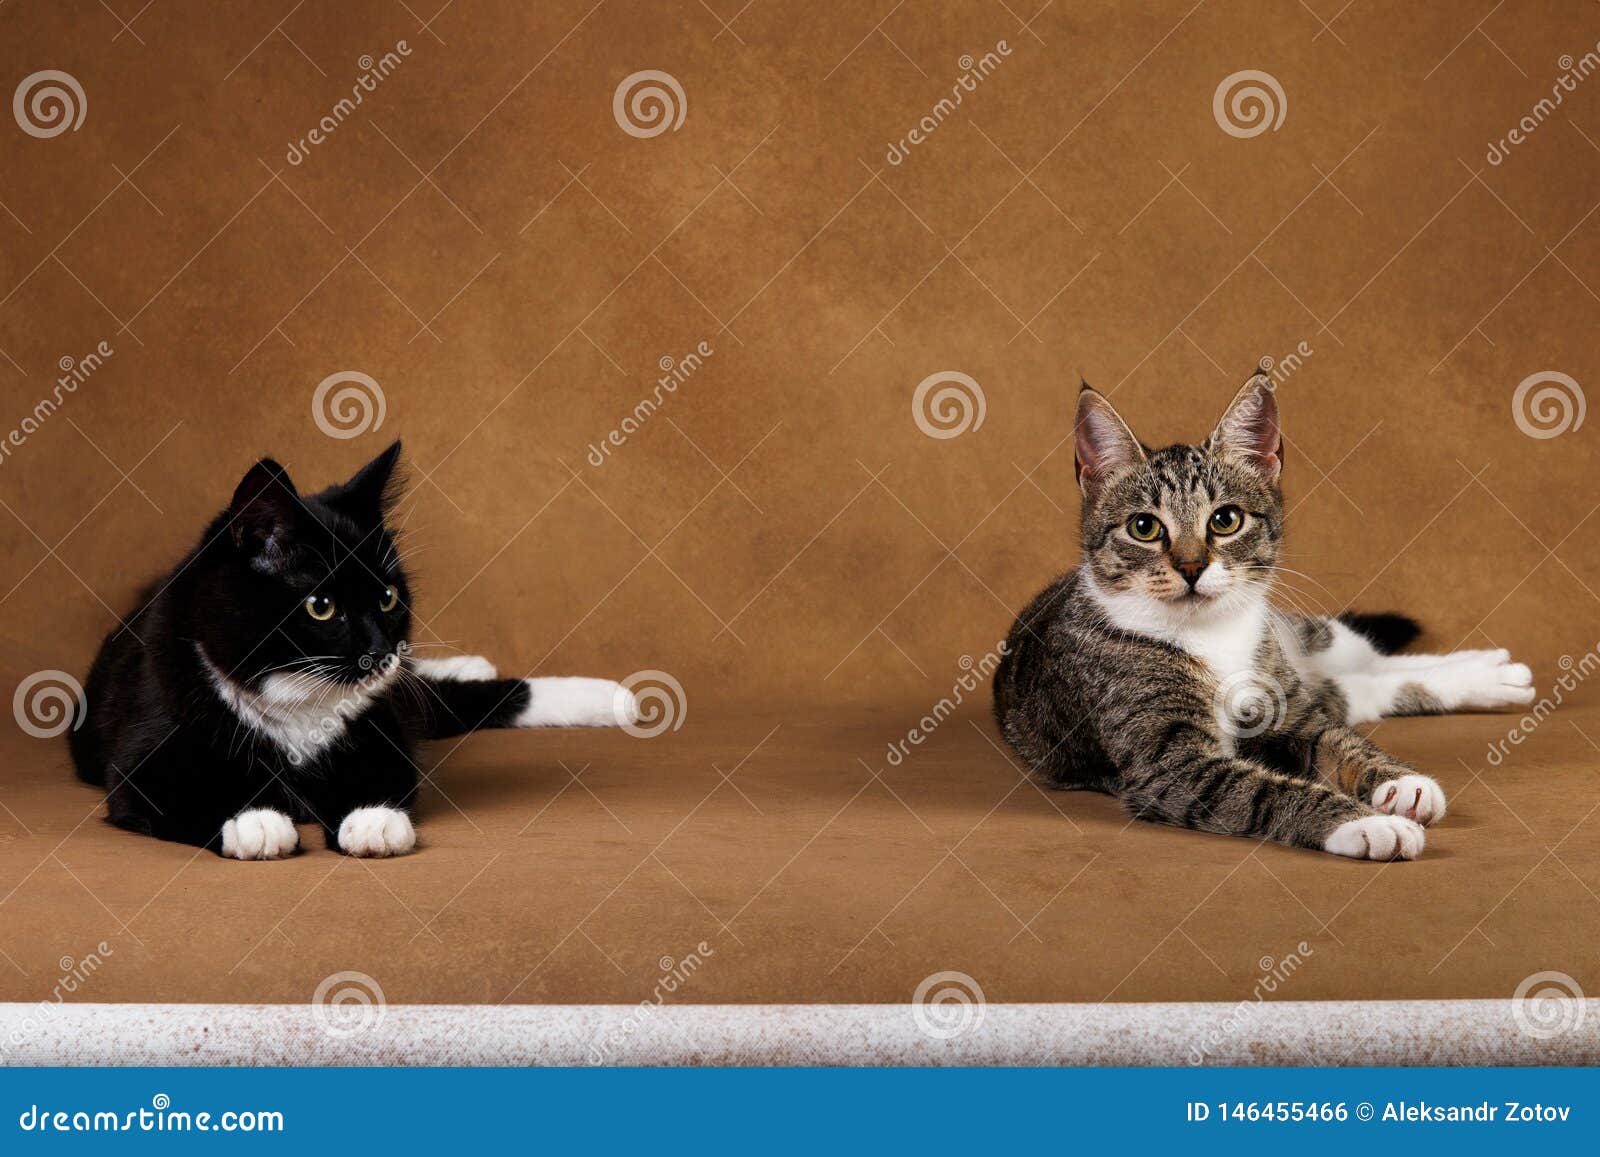 studio shot of a two cats sitting on brown background